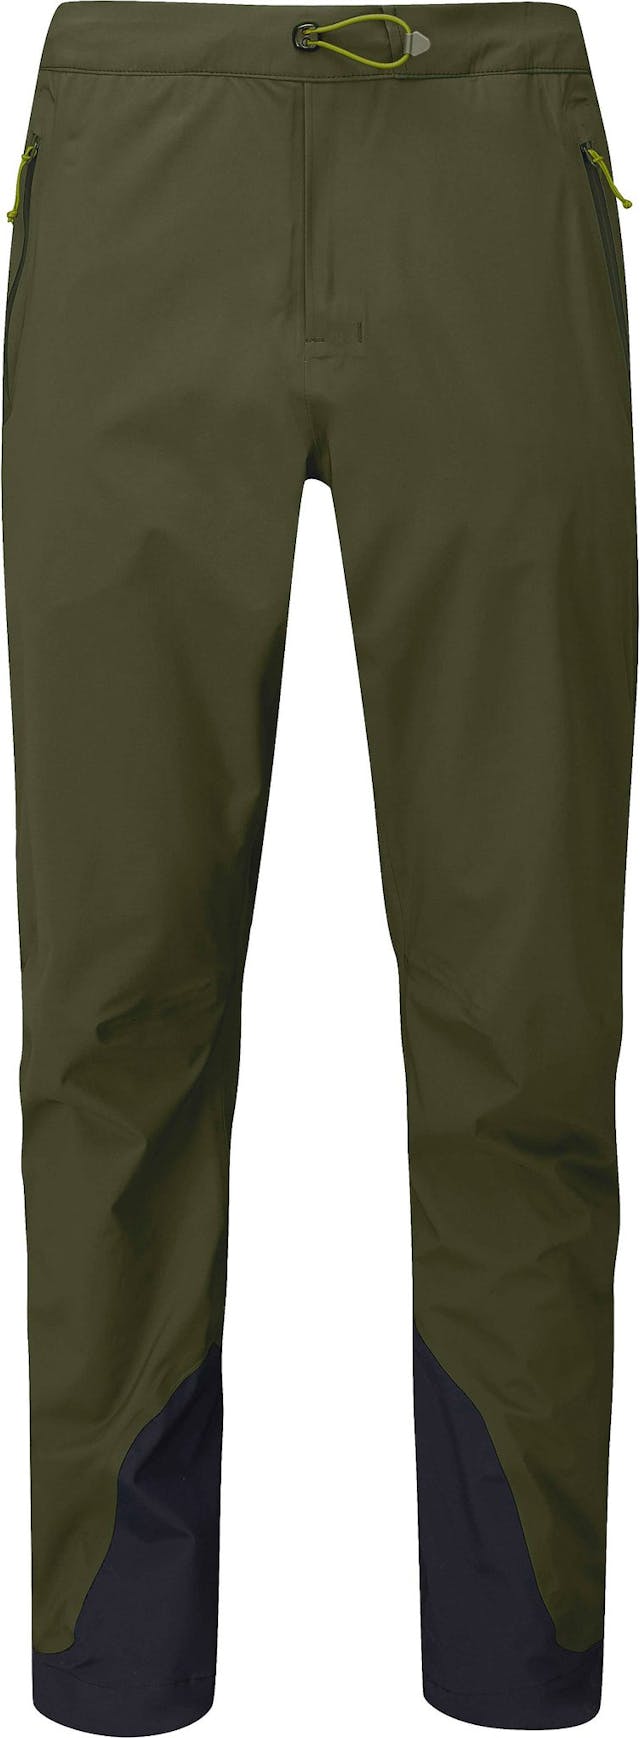 Product image for Kinetic 2.0 Pants - Men's